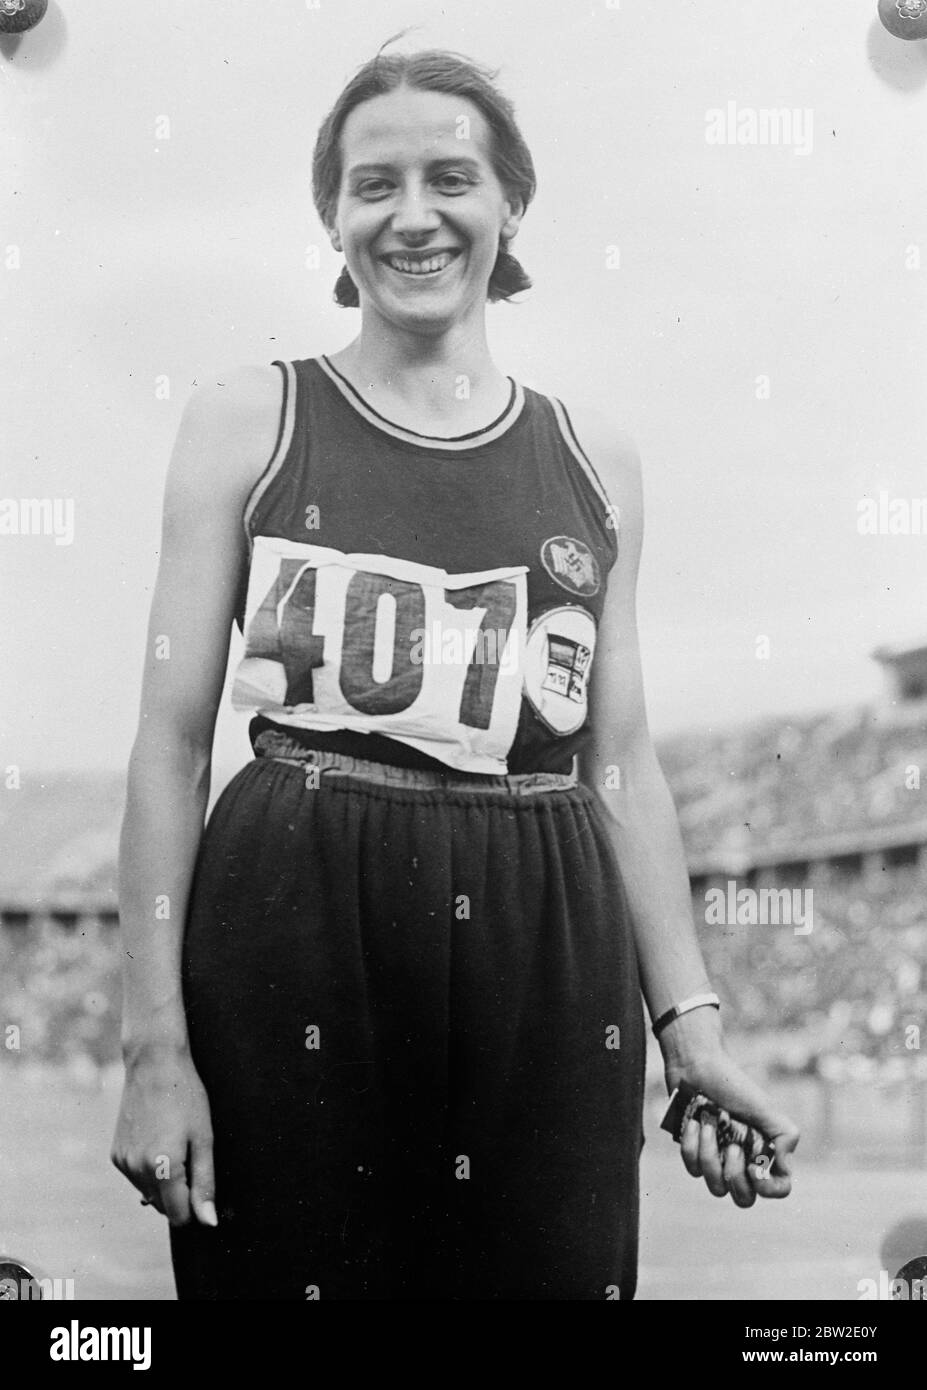 Faulein Dempe after establishing her new world record, with a time of 11.7 seconds, for the 80 metres hurdles in the German athletics meeting at the Olympic Stadium Berlin. 26 July 1937. Stock Photo